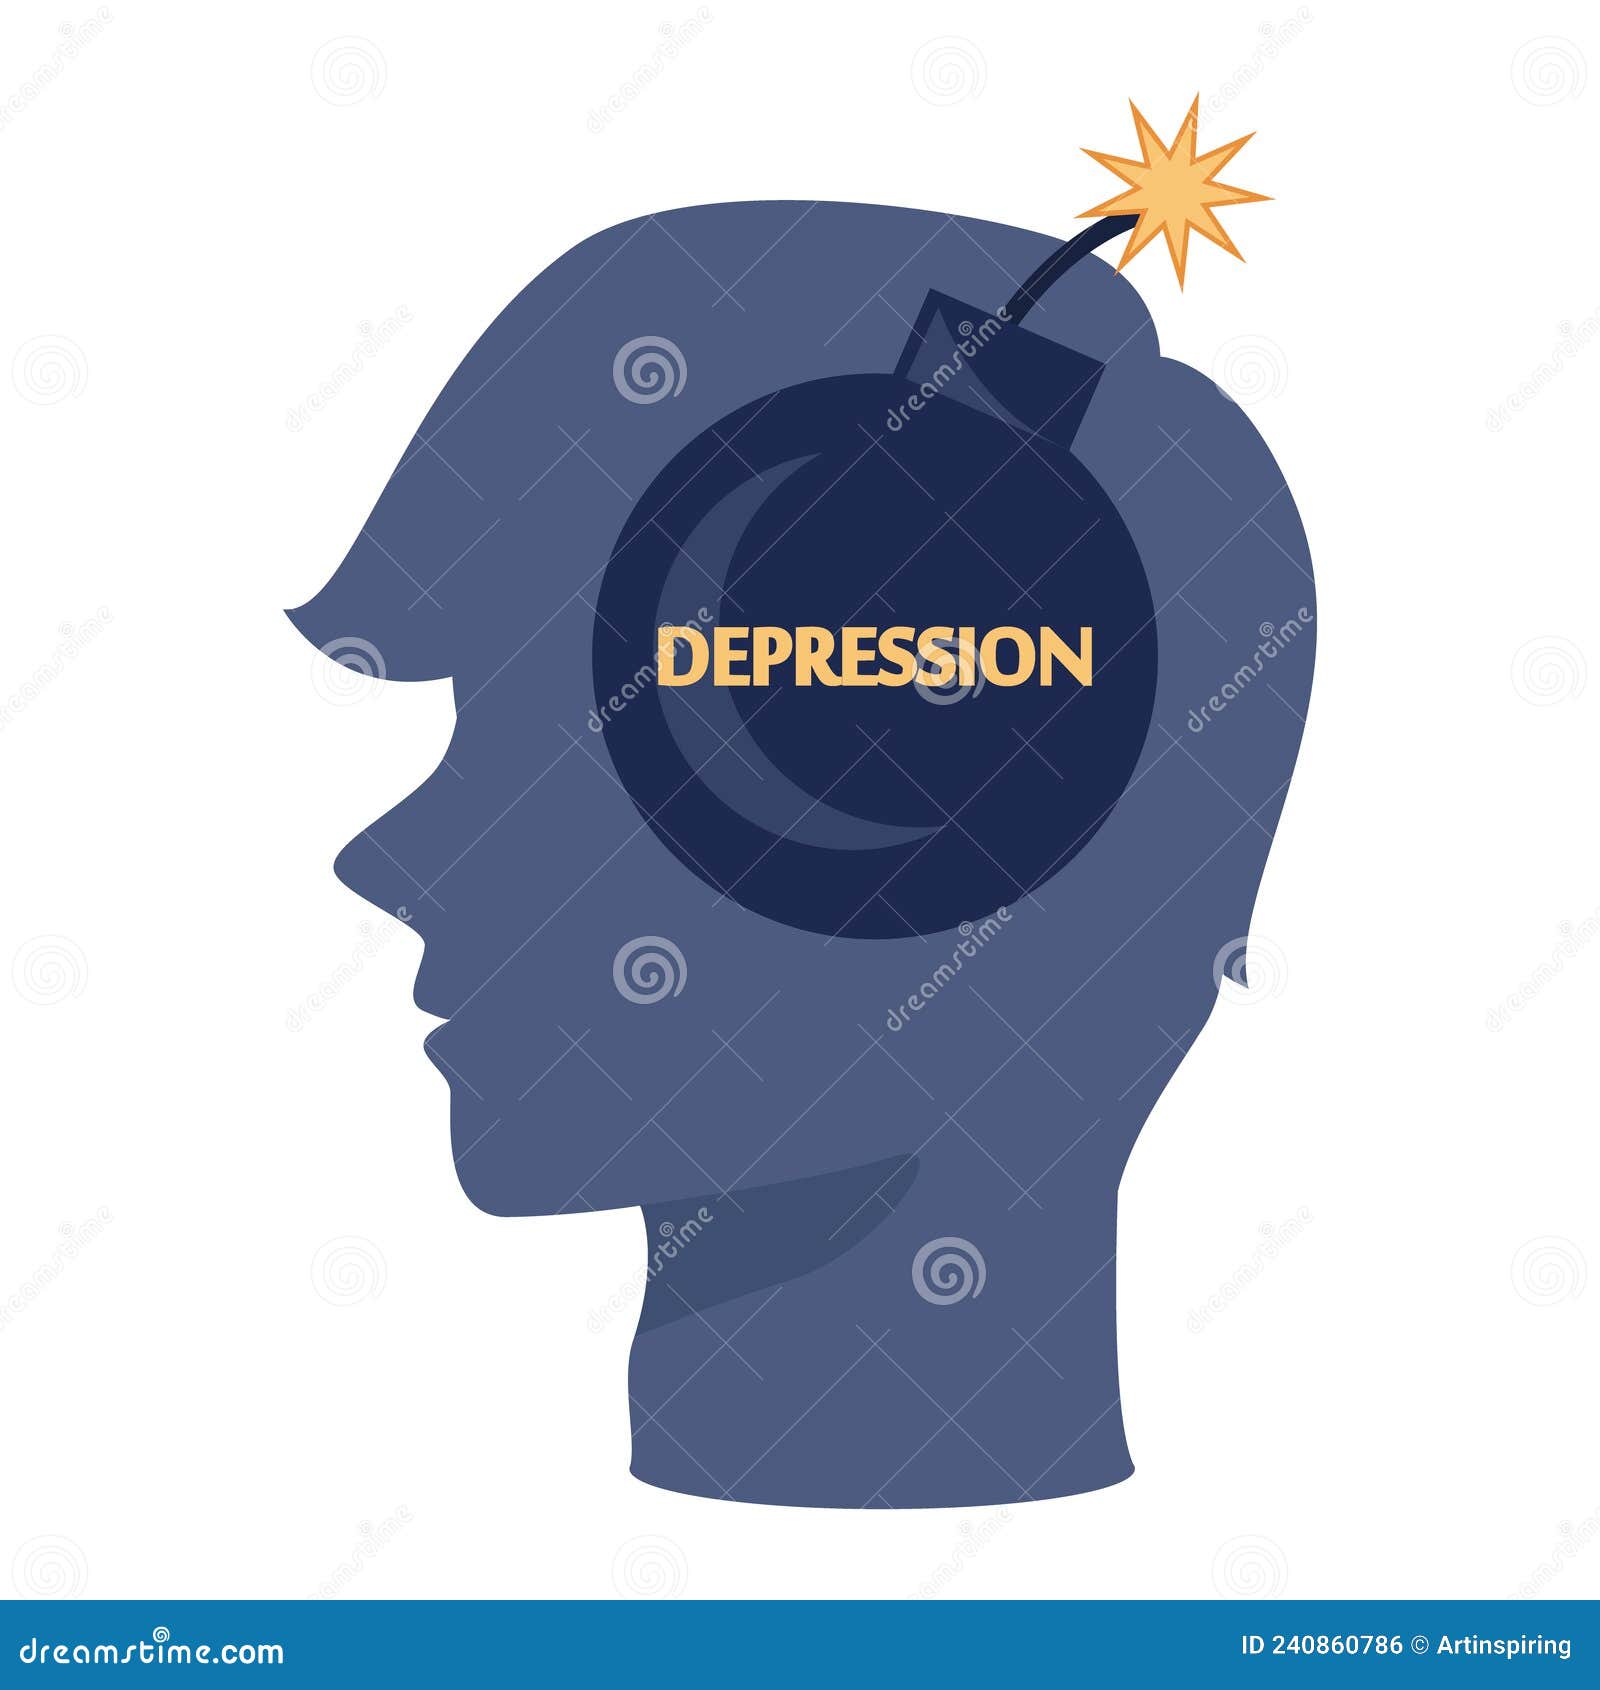 Depression Concept. Mental Disorder, Feeling of Despair and ...